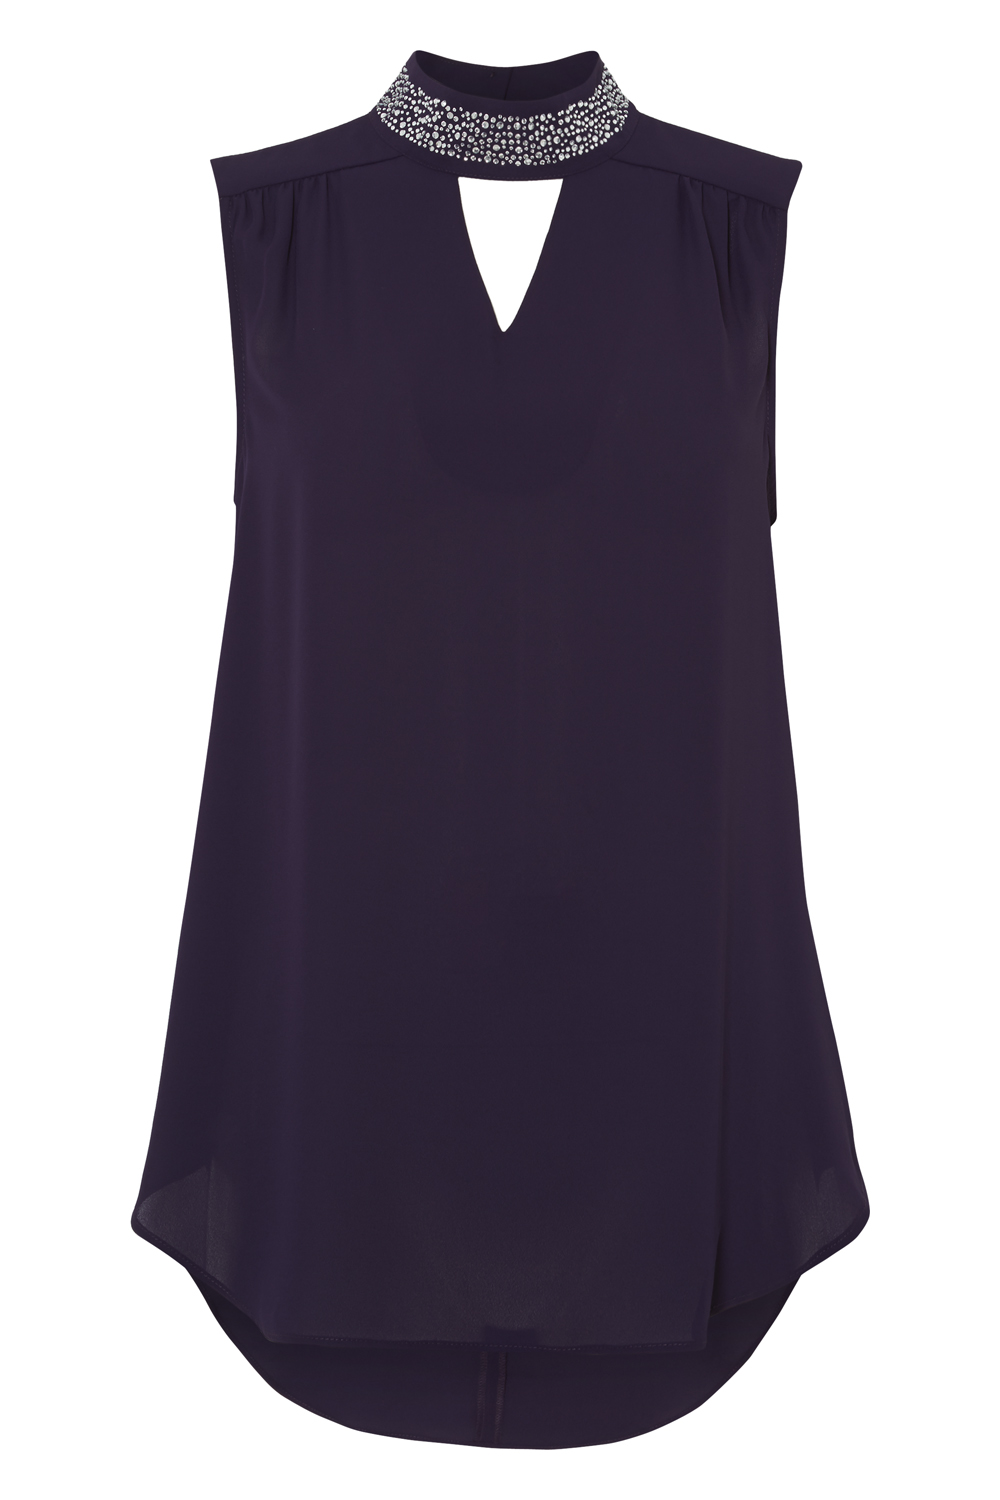 Purple Diamante Embellished High Neck Top, Image 5 of 5